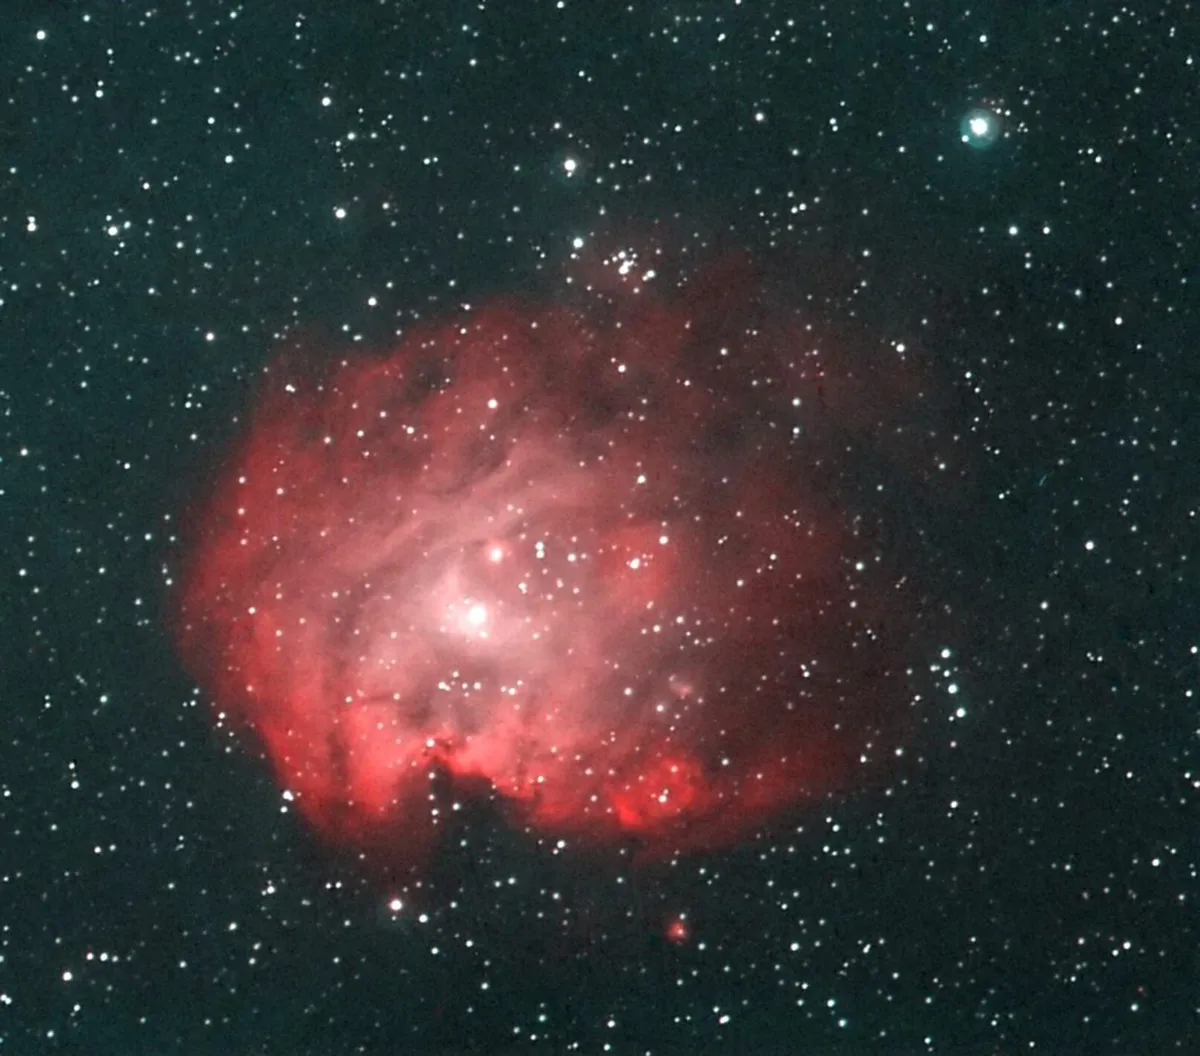 Monkey Head Nebula in Orion by Harry Piper, Watford, UK. Equipment: William Optics 71mm F 5.9 refractor, Orion 50mm mini guide scope, Synscan EQ5 goto mount, Atik 428 EX mono CCD, manual filter wheel, Astronomik H alpha, OIII filters.